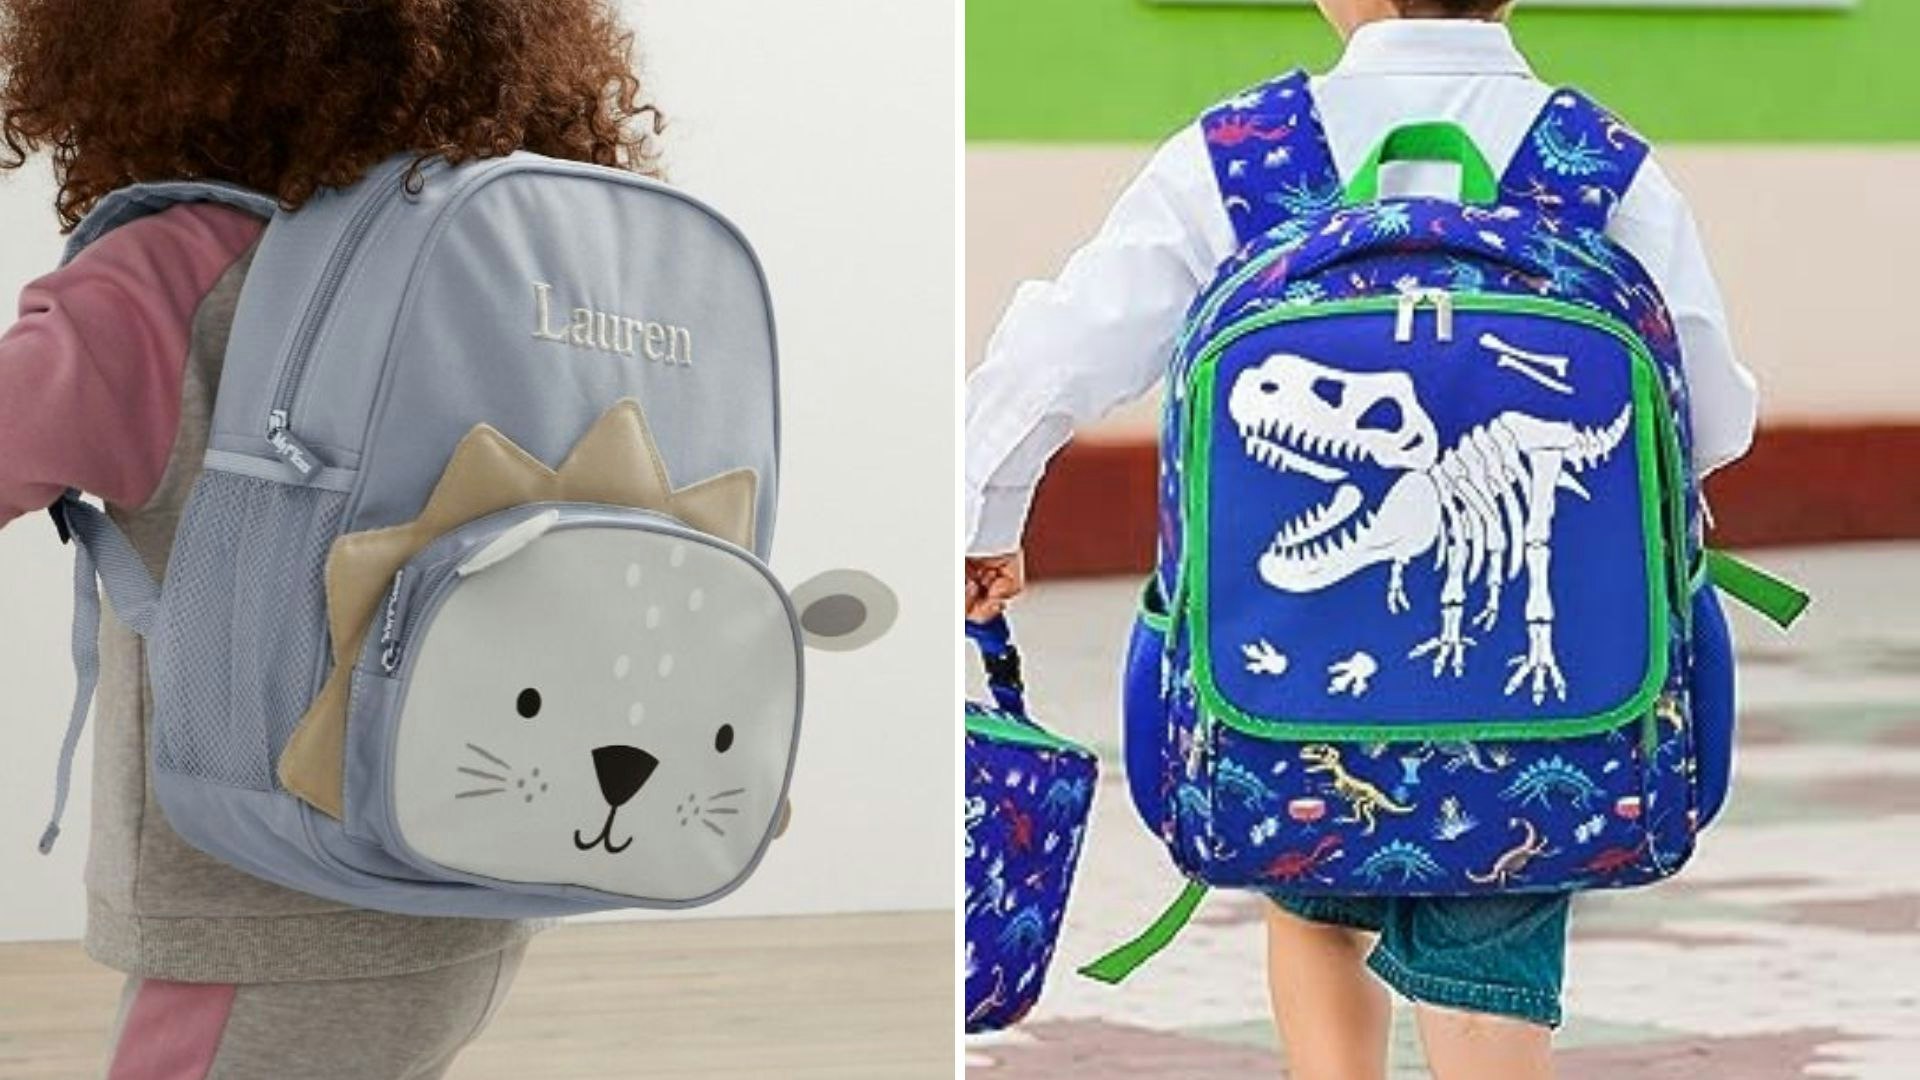 https://images.bauerhosting.com/affiliates/sites/12/2022/08/back-to-school-backpacks-1.jpg?ar=16%3A9&fit=crop&crop=top&auto=format&w=undefined&q=80